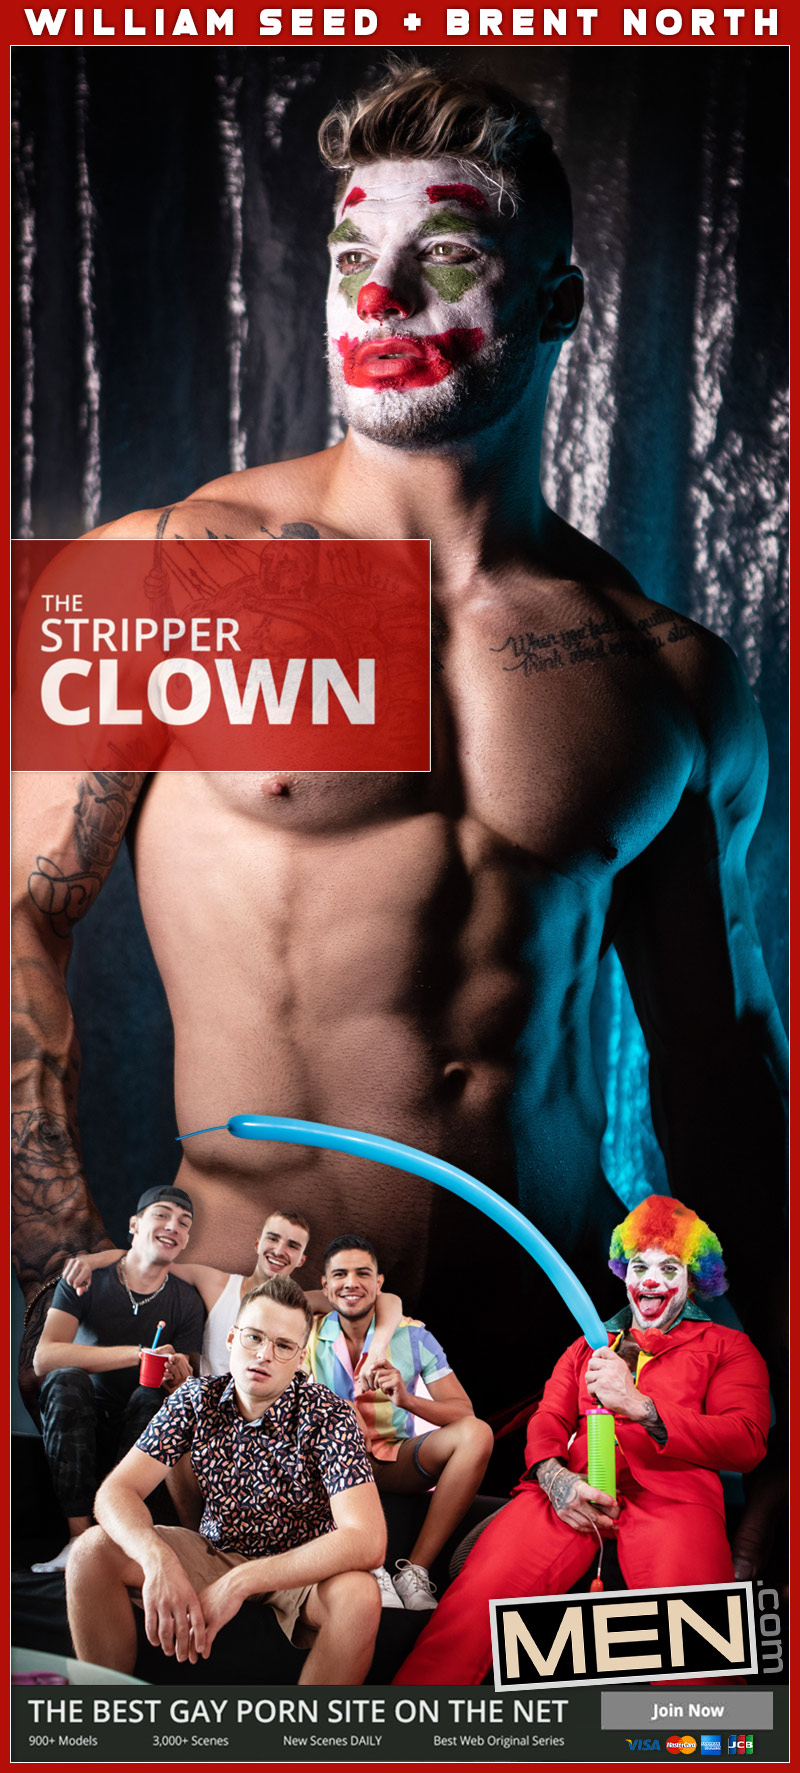 The Stripper Clown - William Seed and Brent North Cover